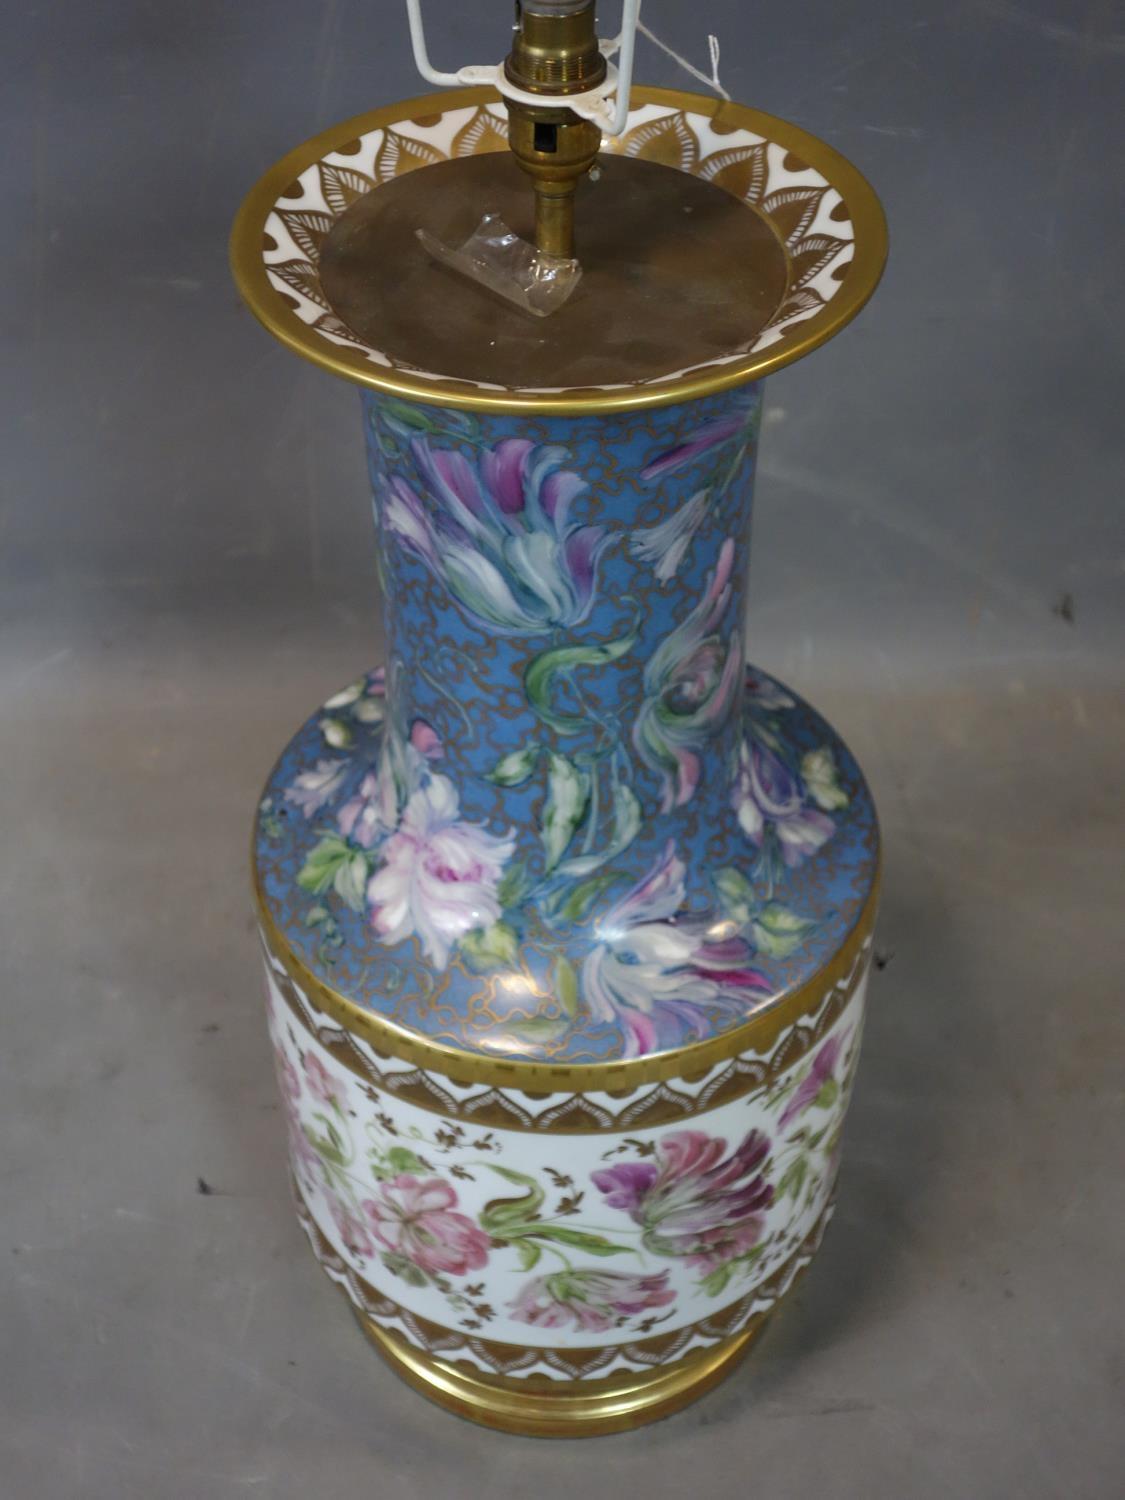 A large 20th century porcelain lamp, hand painted with flowers and gilt, possibly by Limoges, with - Image 2 of 3